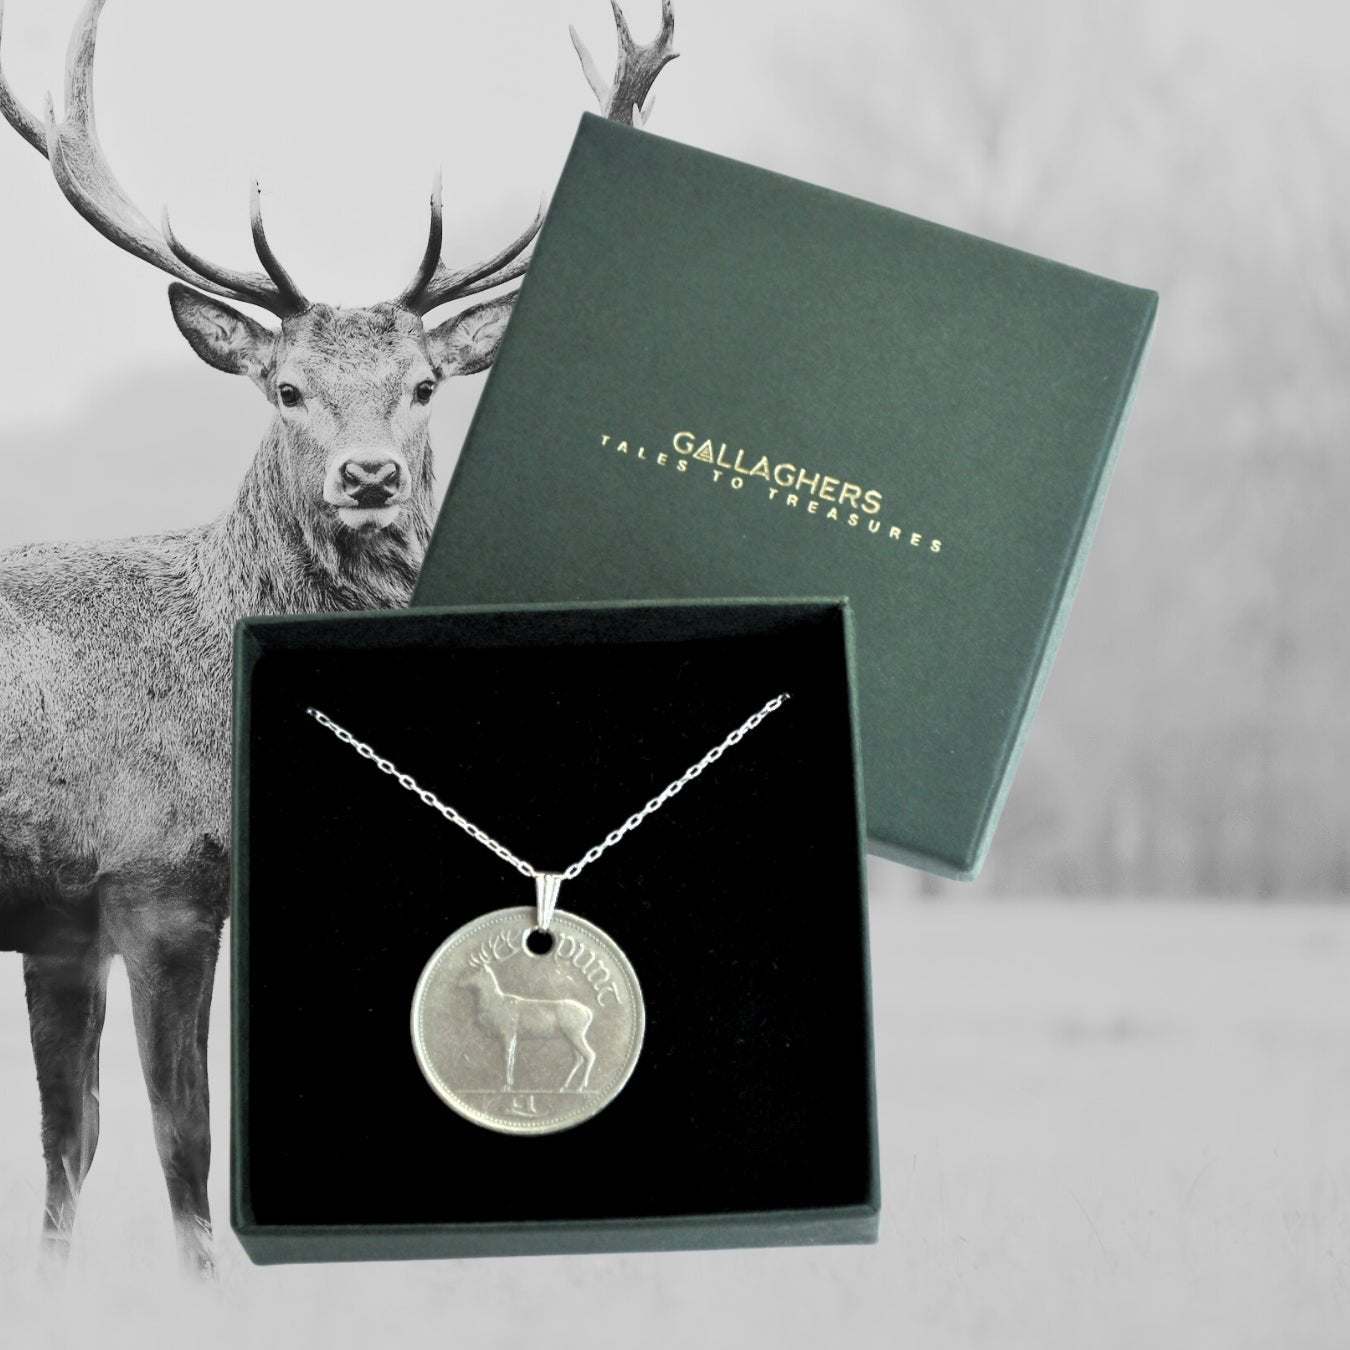 Silver Irish Stag Pendant - Gallaghers Gifts